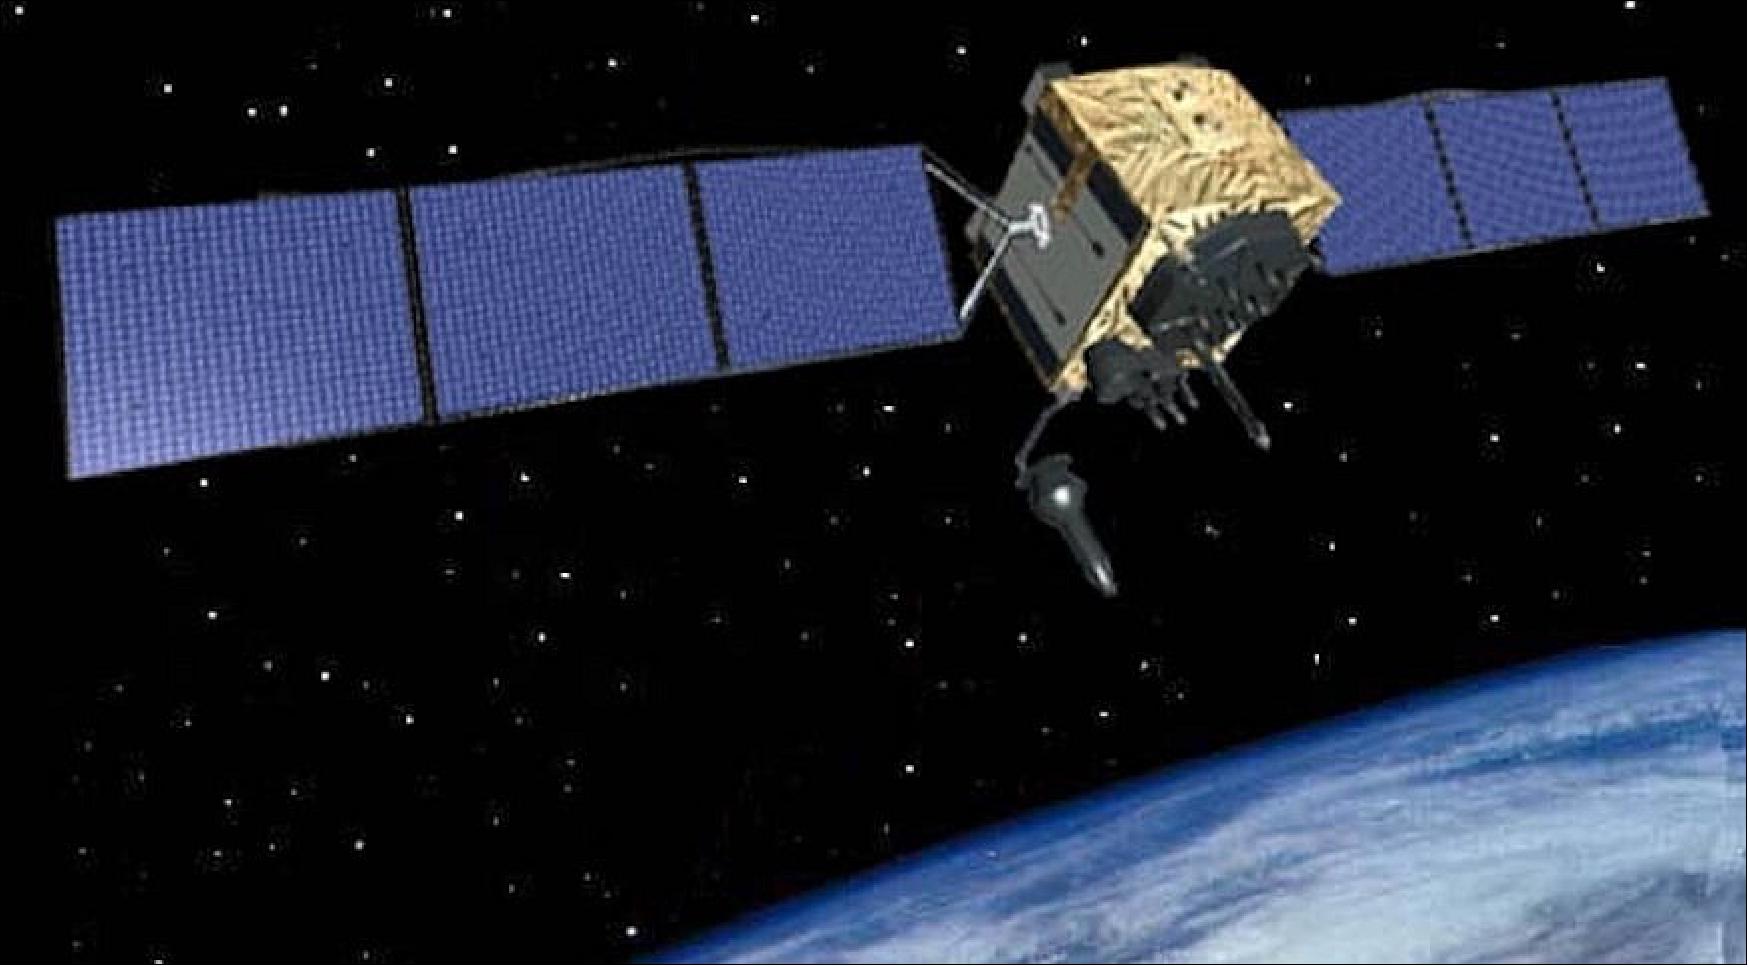 Figure 40: The Global Positioning System IIF satellite, developed and built by Boeing, is the next generation of GPS space vehicle (image credit:U.S. Air Force graphic)